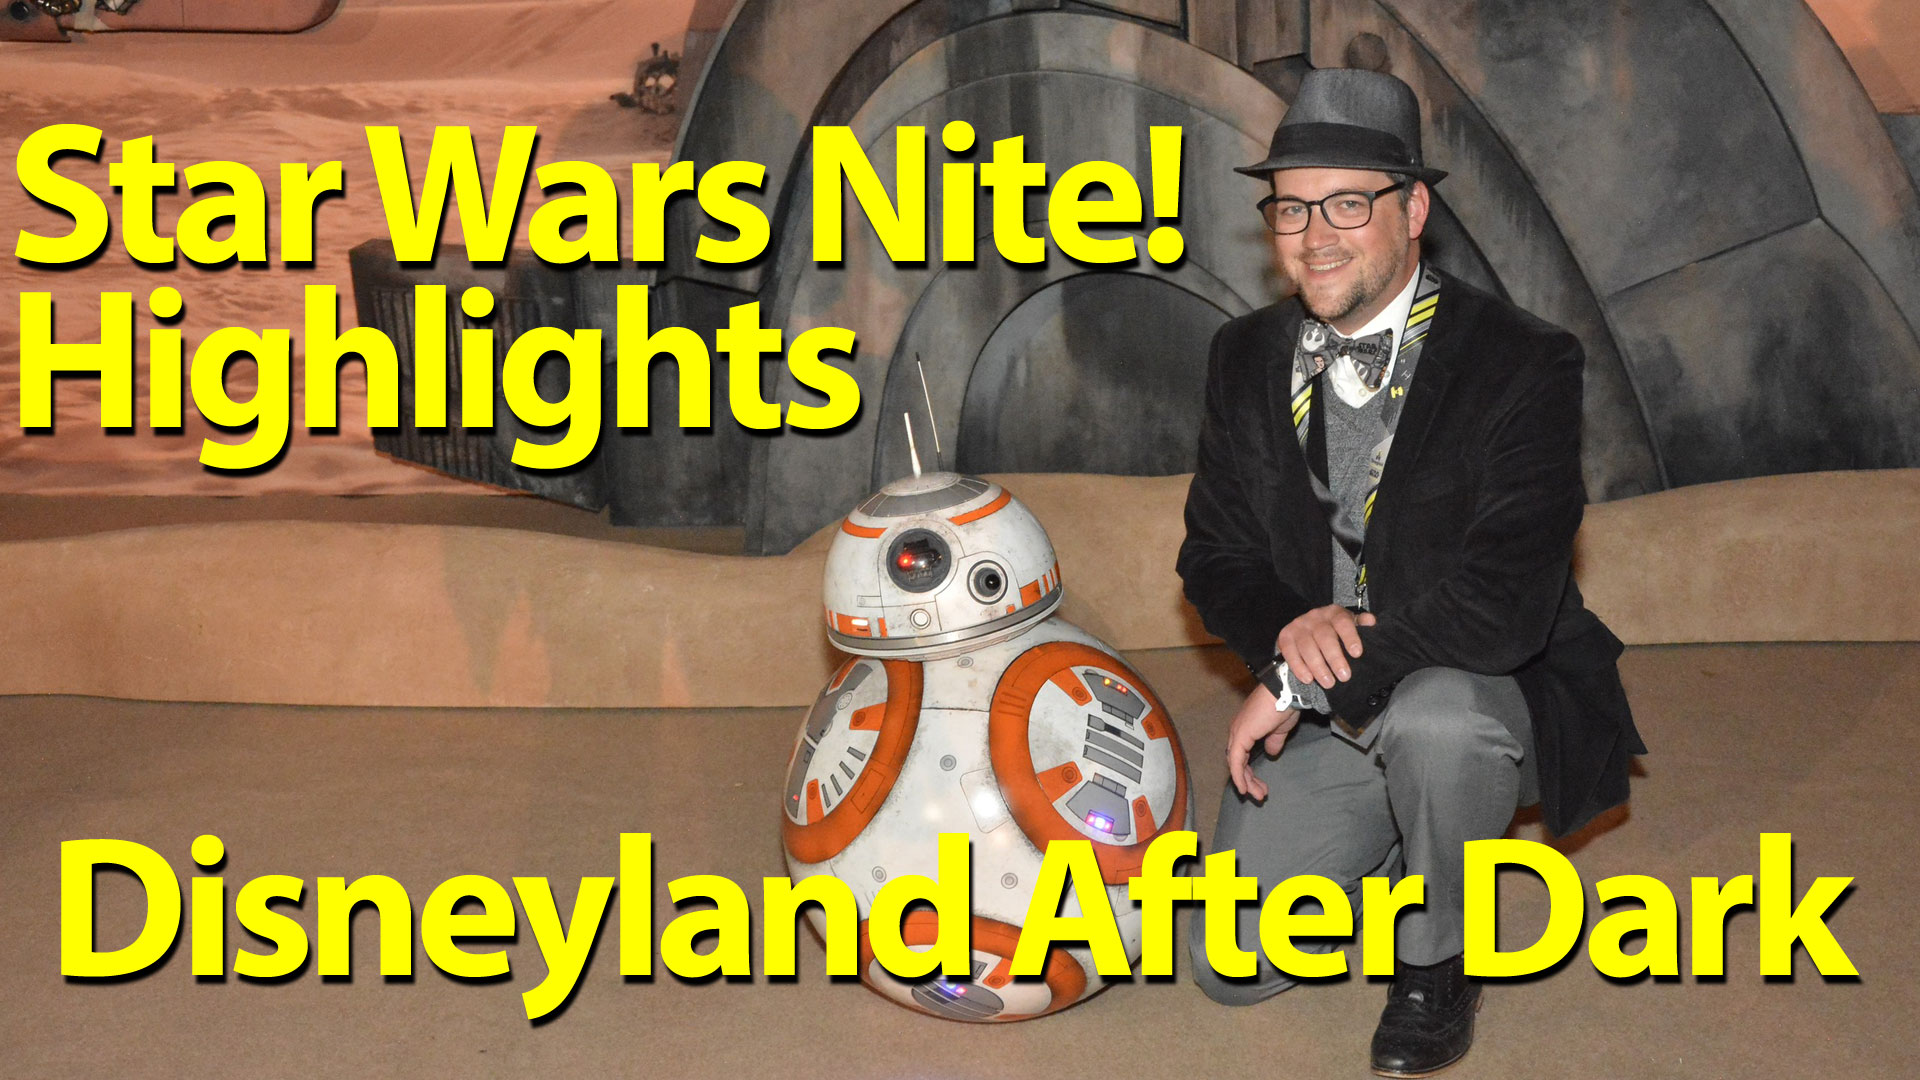 The Force is Strong With Star Wars Nite at Disneyland After Dark